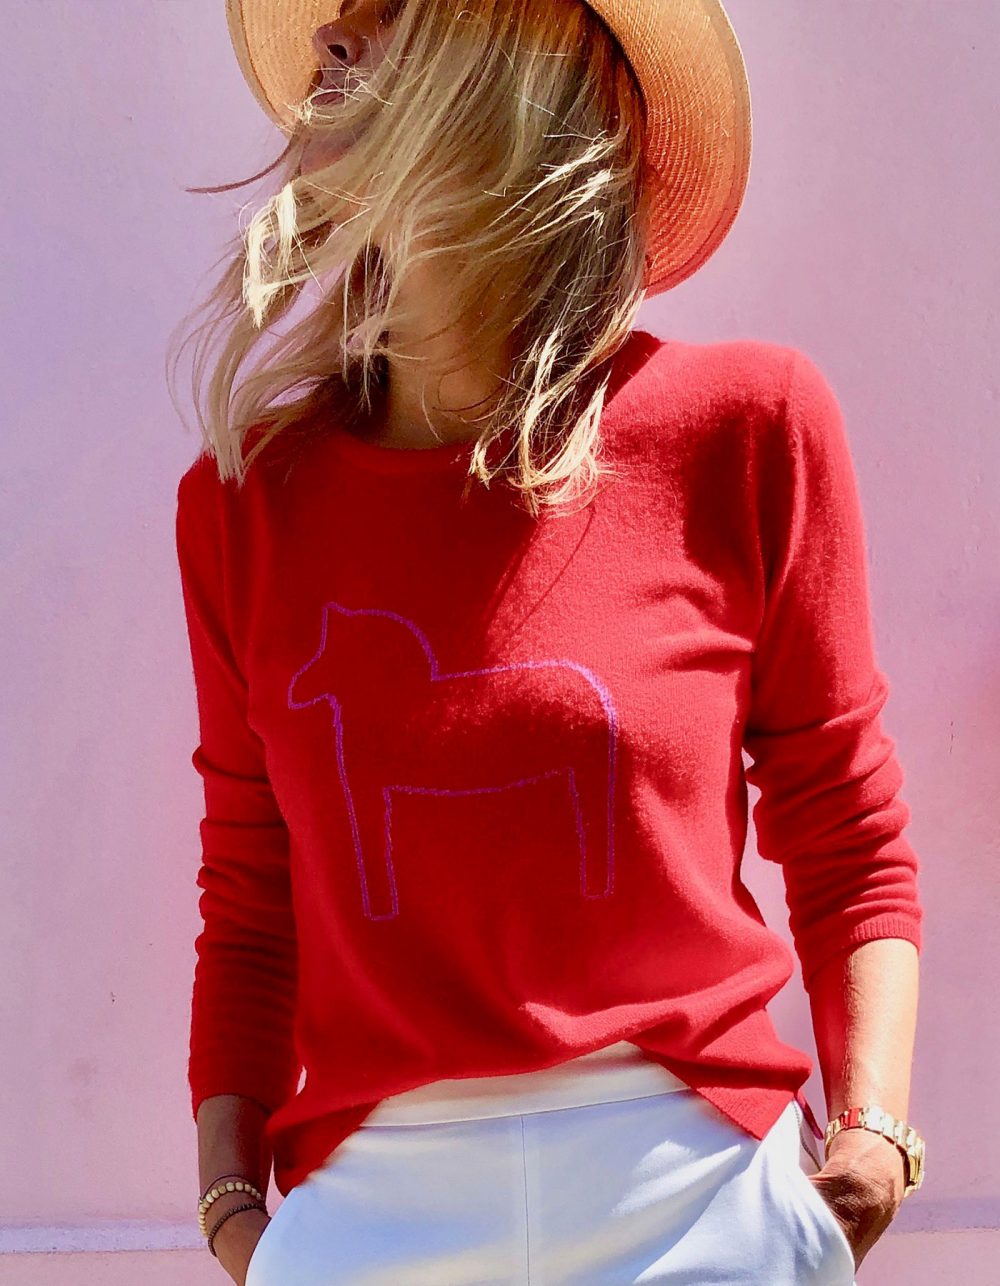 Model wearing malin darlin Dalahast horse cashmere jumpers, a pony shown on red cashmere.